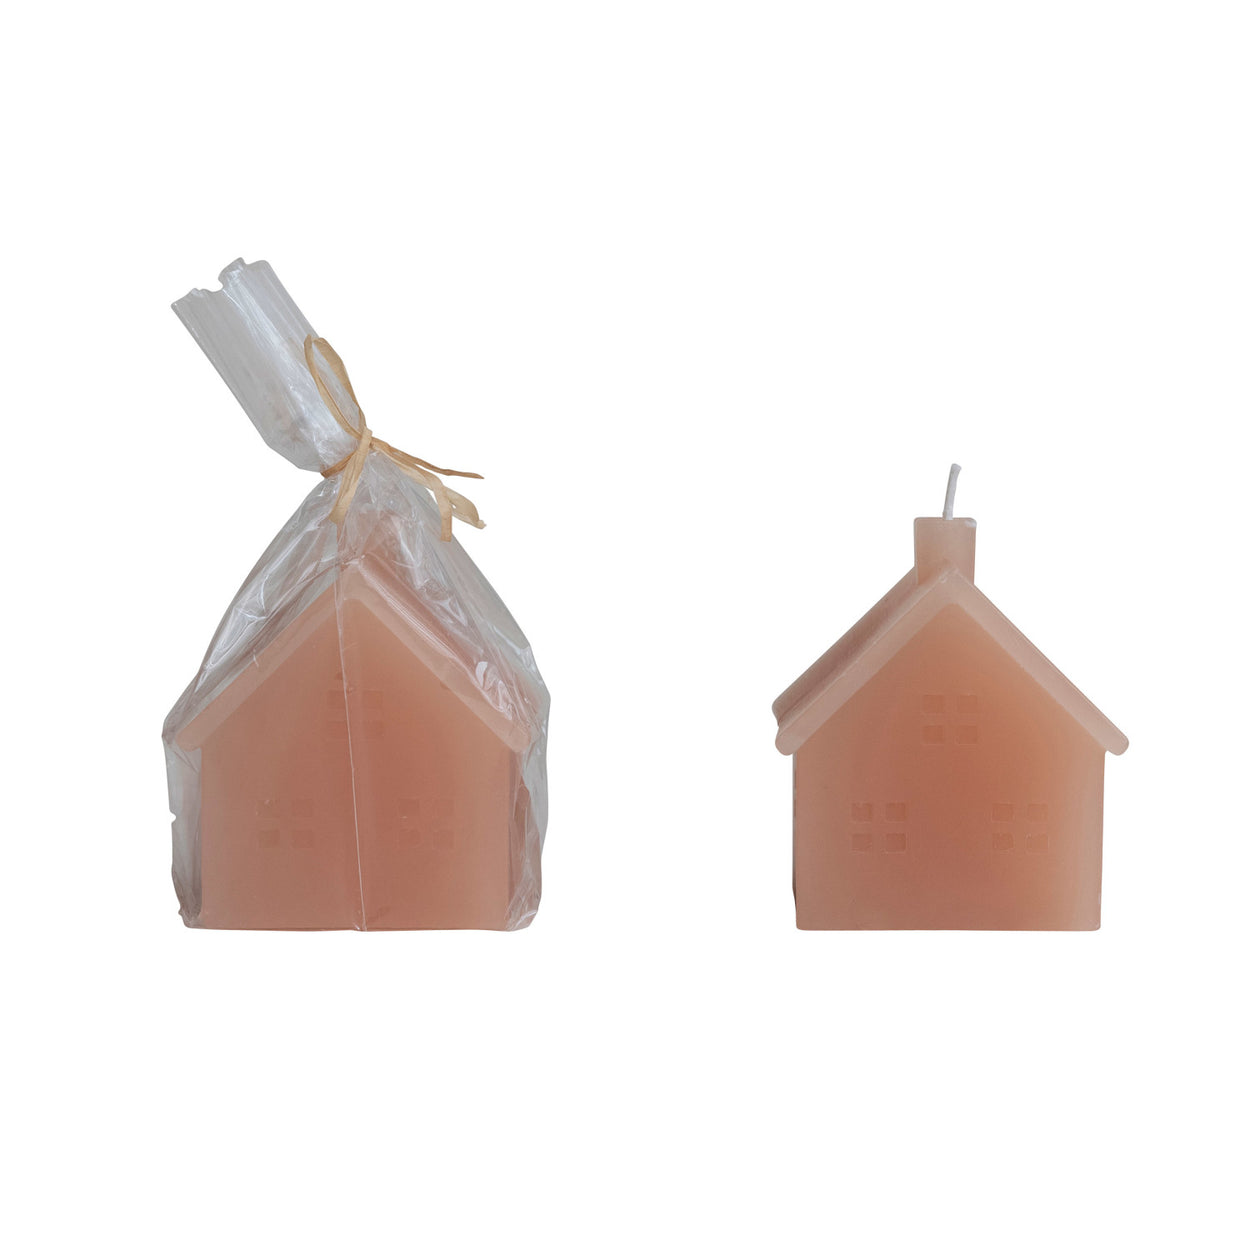 Apricot Unscented House Shaped Candle